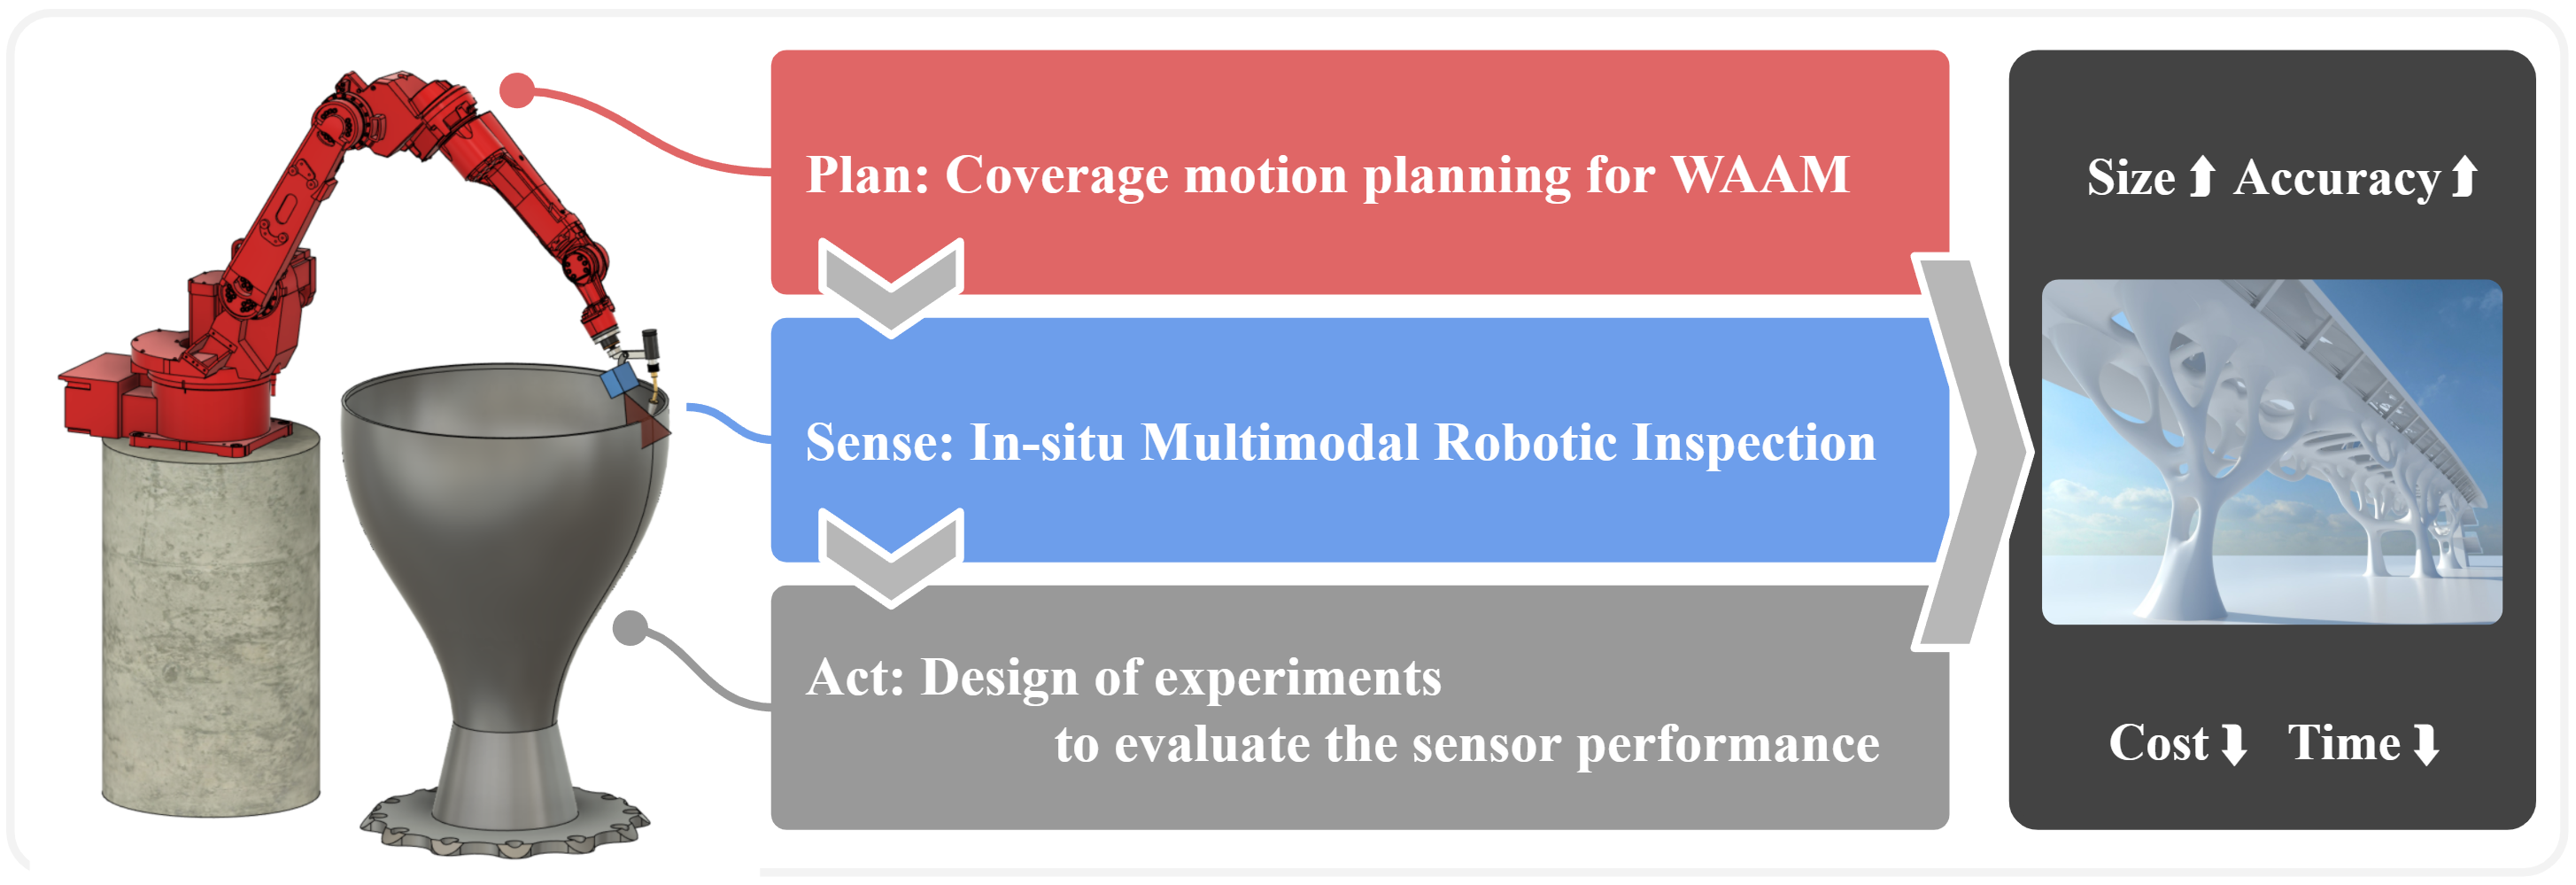 A diagram describing the three steps to improving size, accuracy, cost, and time with this machine. Plan: Coverage motion running for WAAM. Sense: In-situ Multimodal Robotics Inspection. Act: Design of experiments to evaluate the sensor performance.